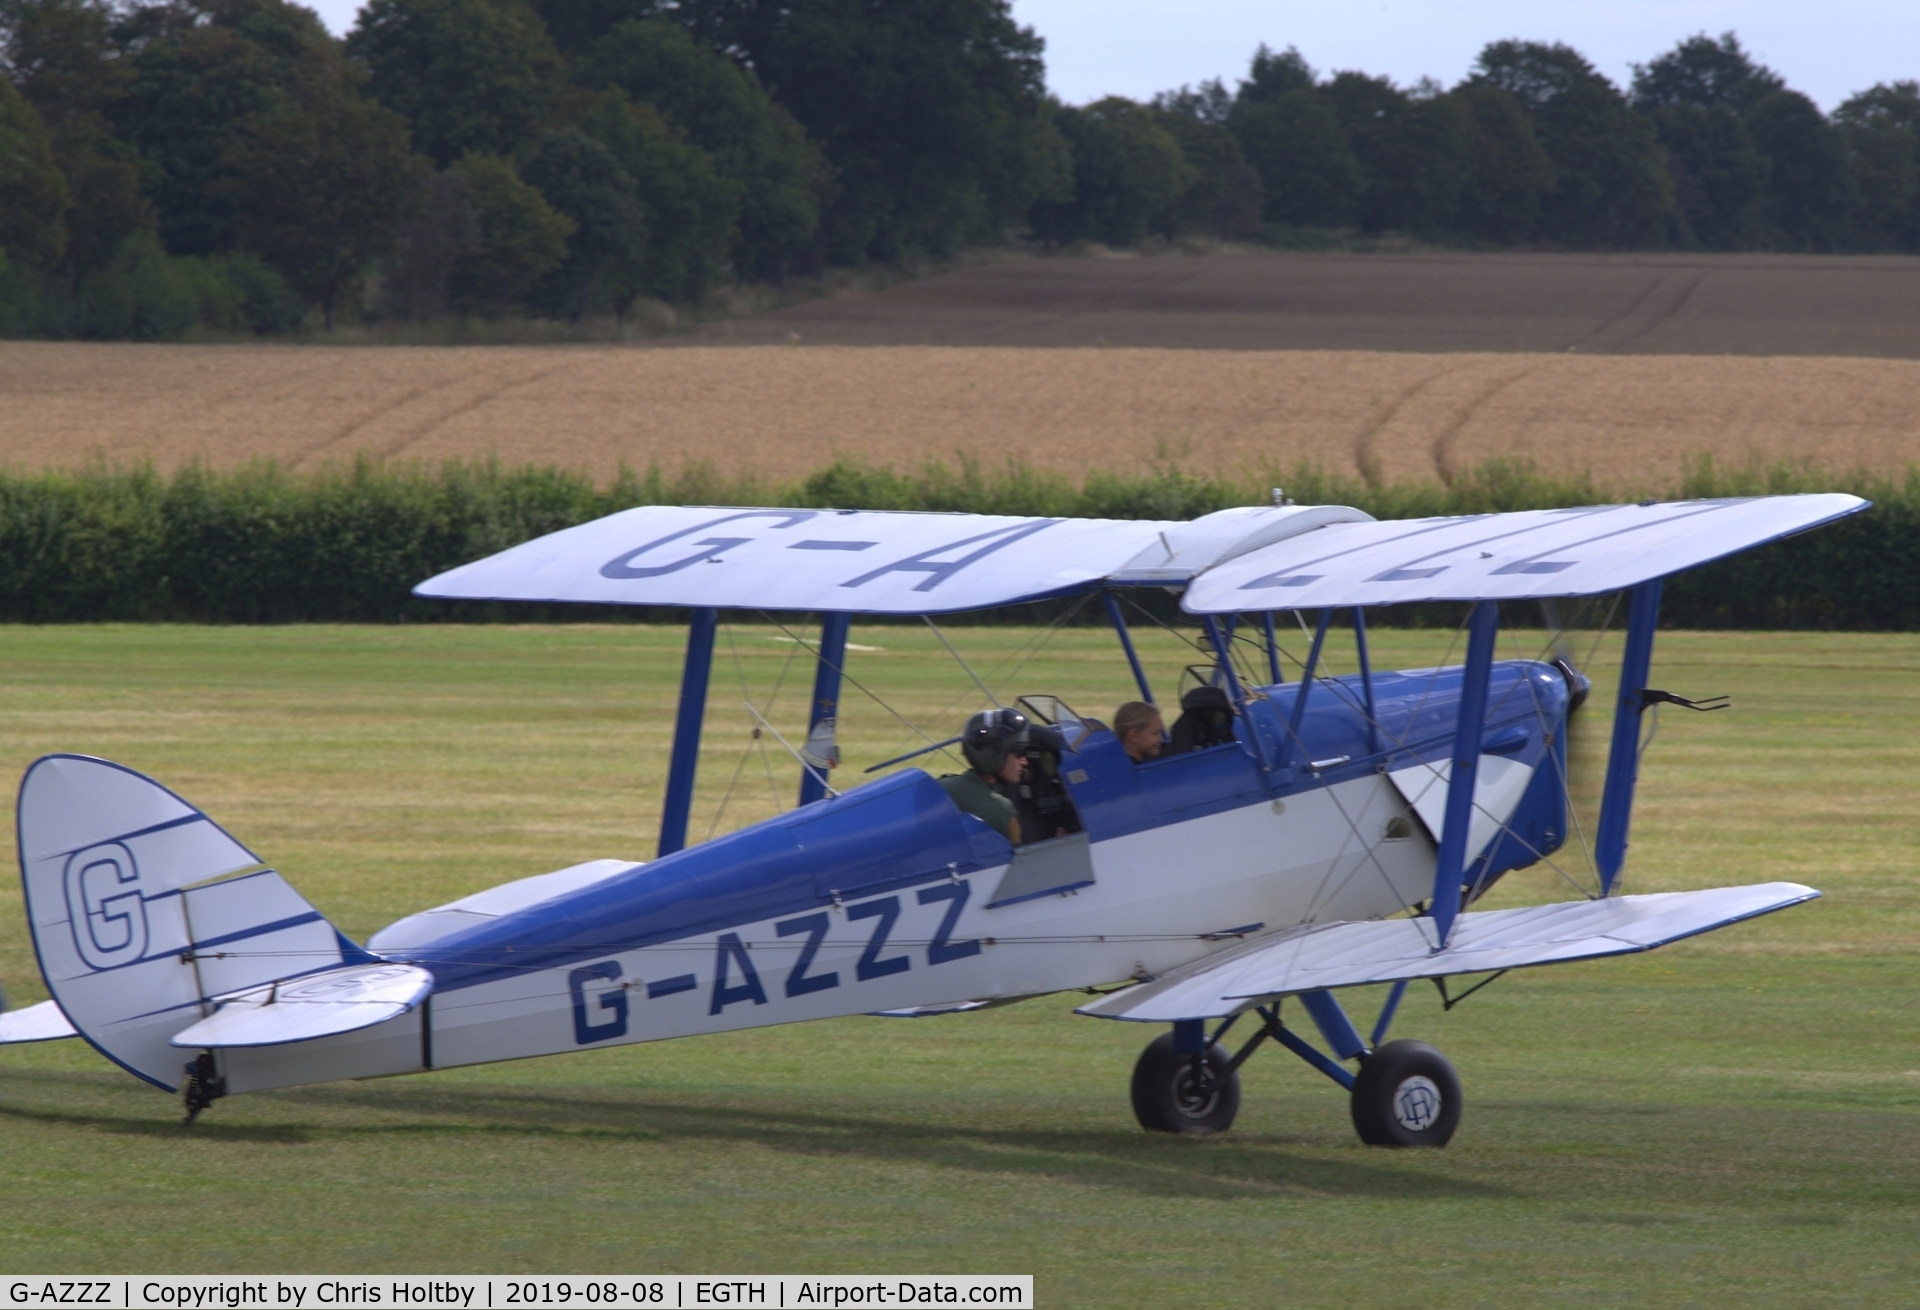 G-AZZZ, 1944 De Havilland DH-82A Tiger Moth II C/N 86311, 1944 Tiger Moth taxiing for take-off at the 'Gathering of Moths' Day 2019 at Old Warden